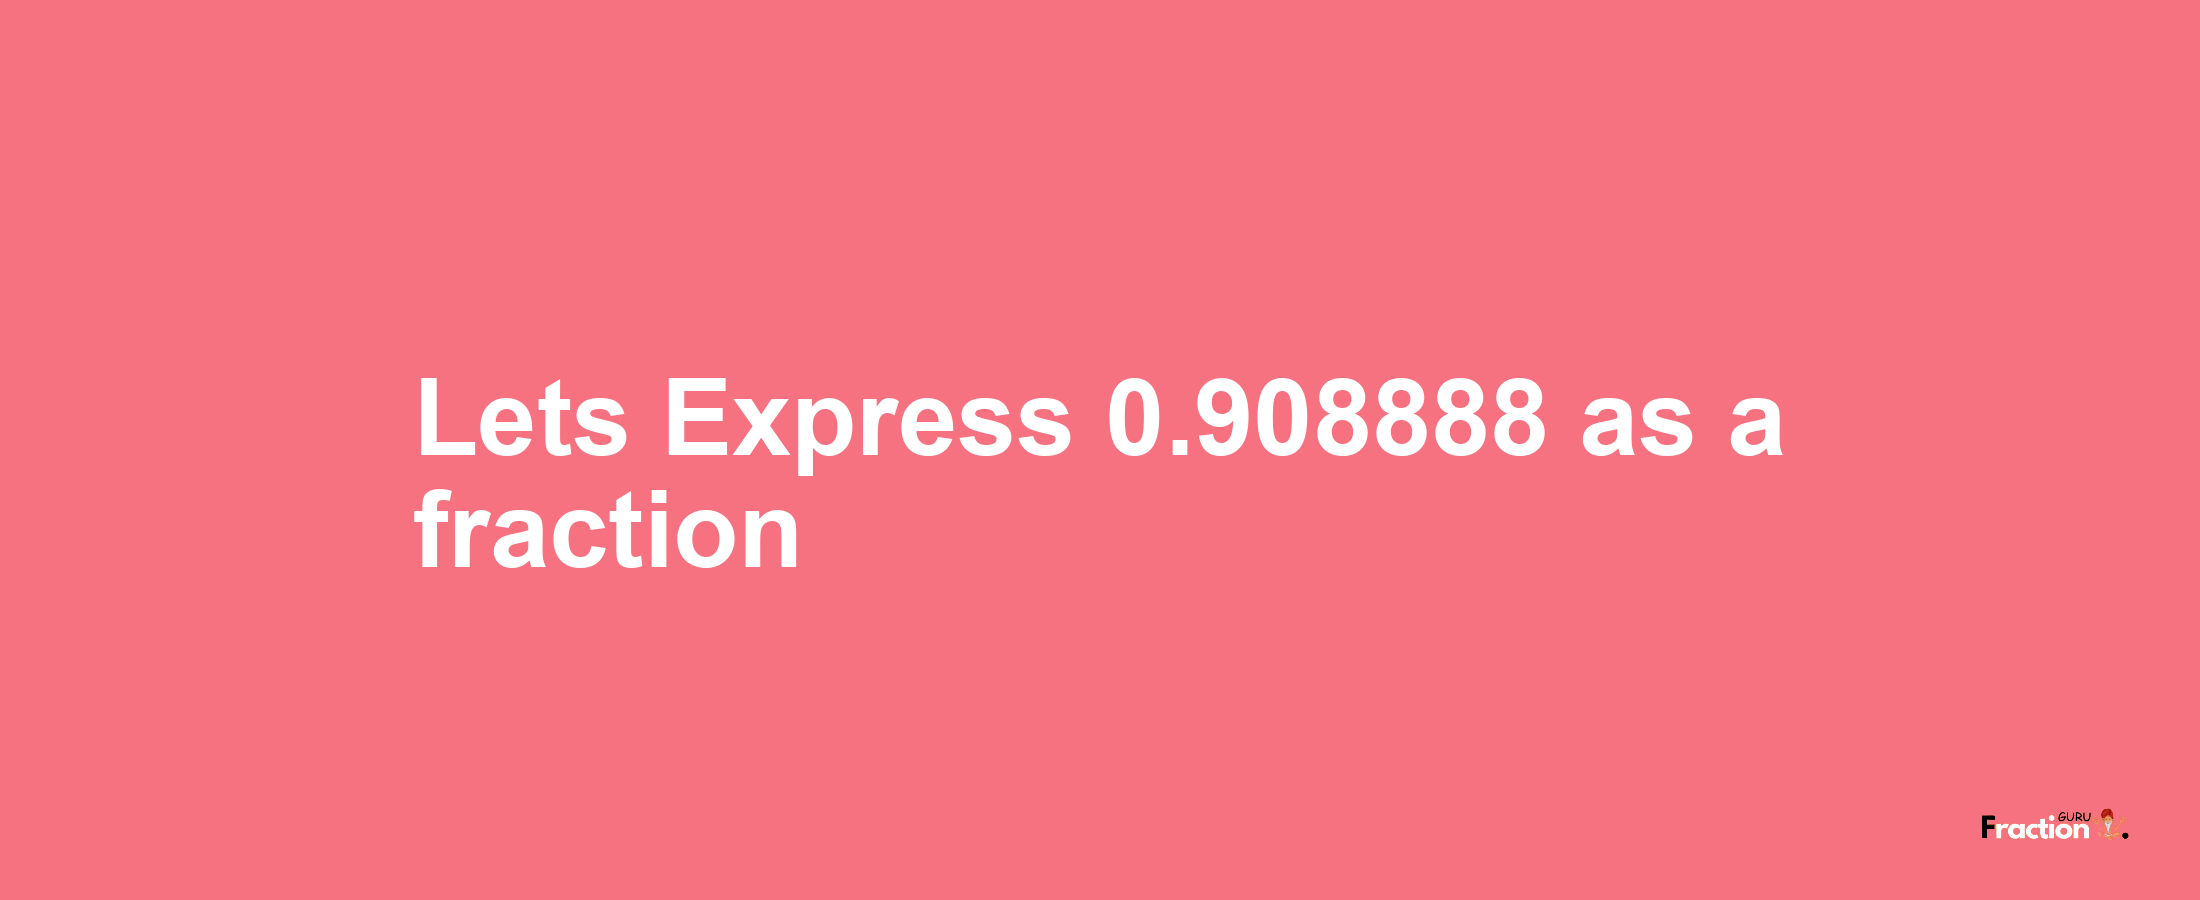 Lets Express 0.908888 as afraction